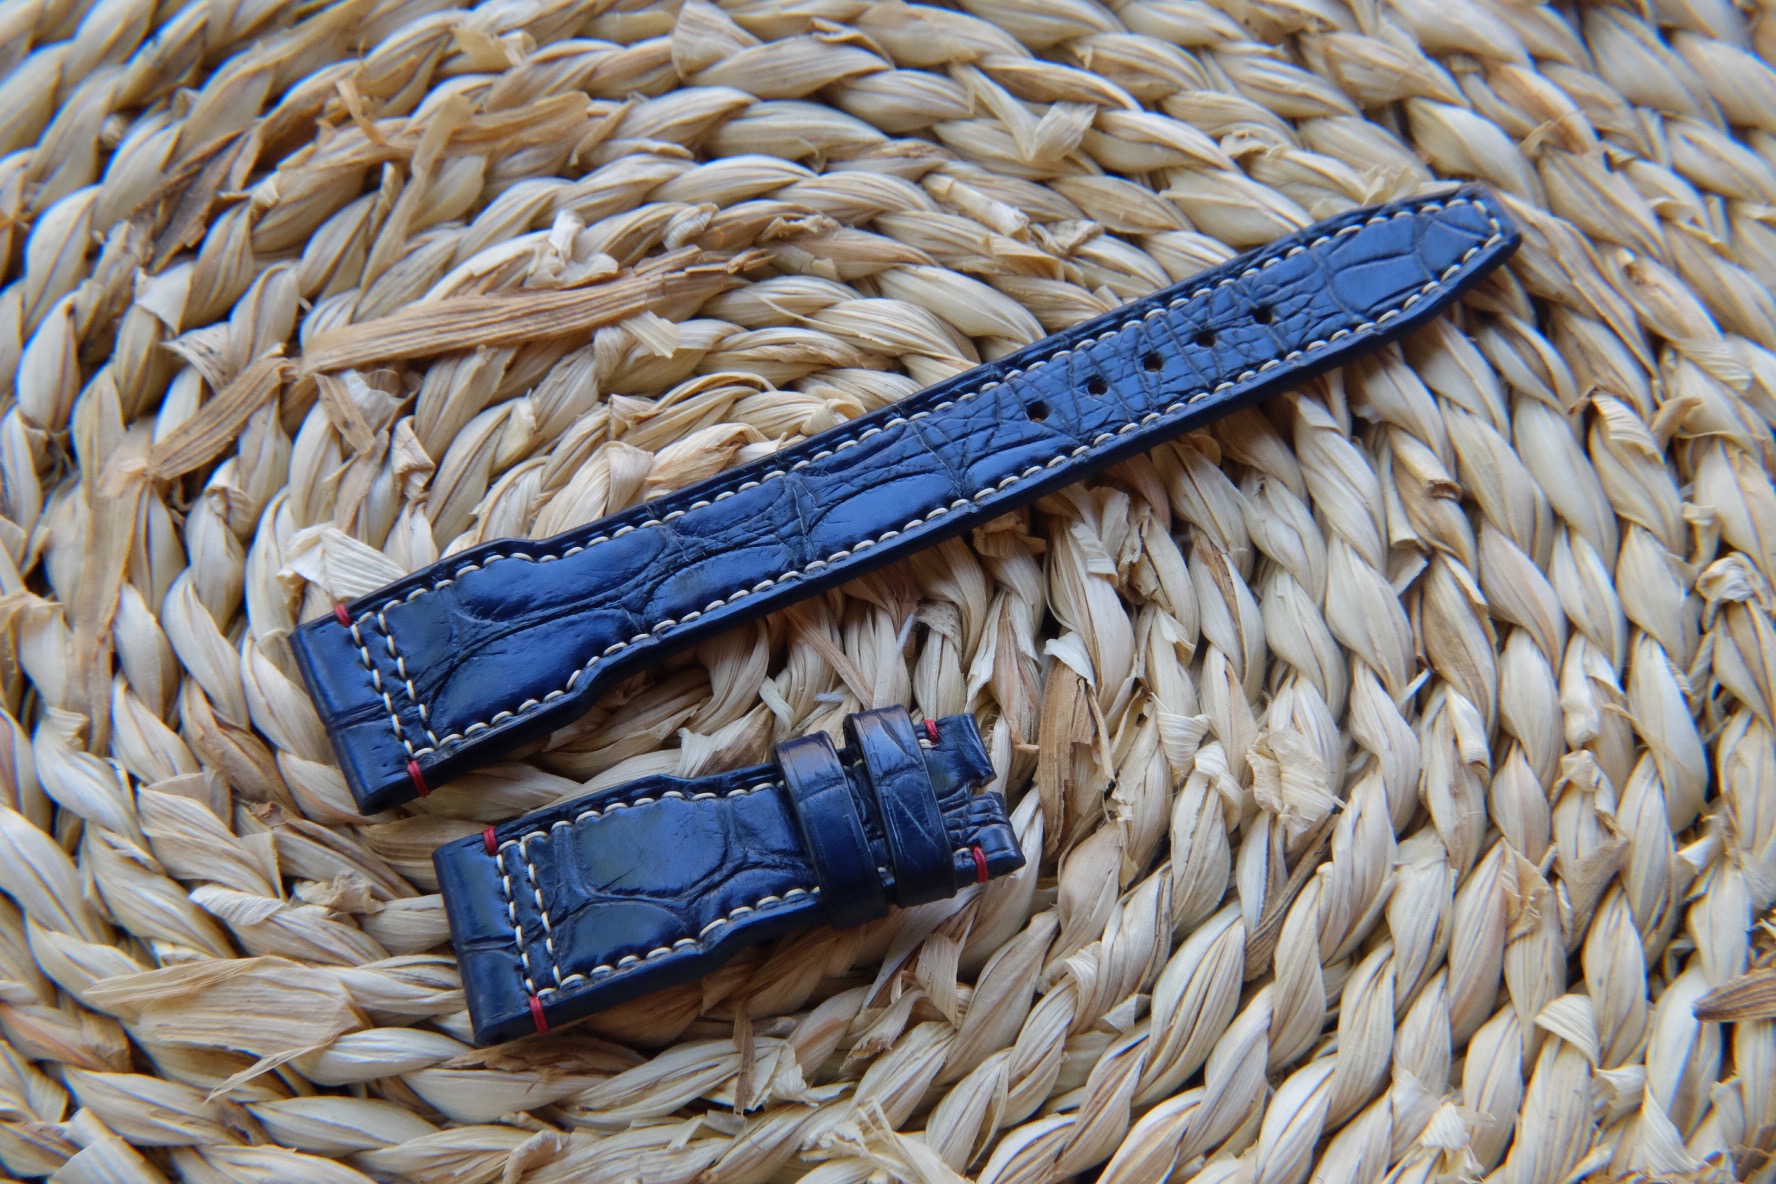 Revival Strap 21mm Pilot Style Blue Ostrich Leather Watch Strap for IWC, Semi Square Tail